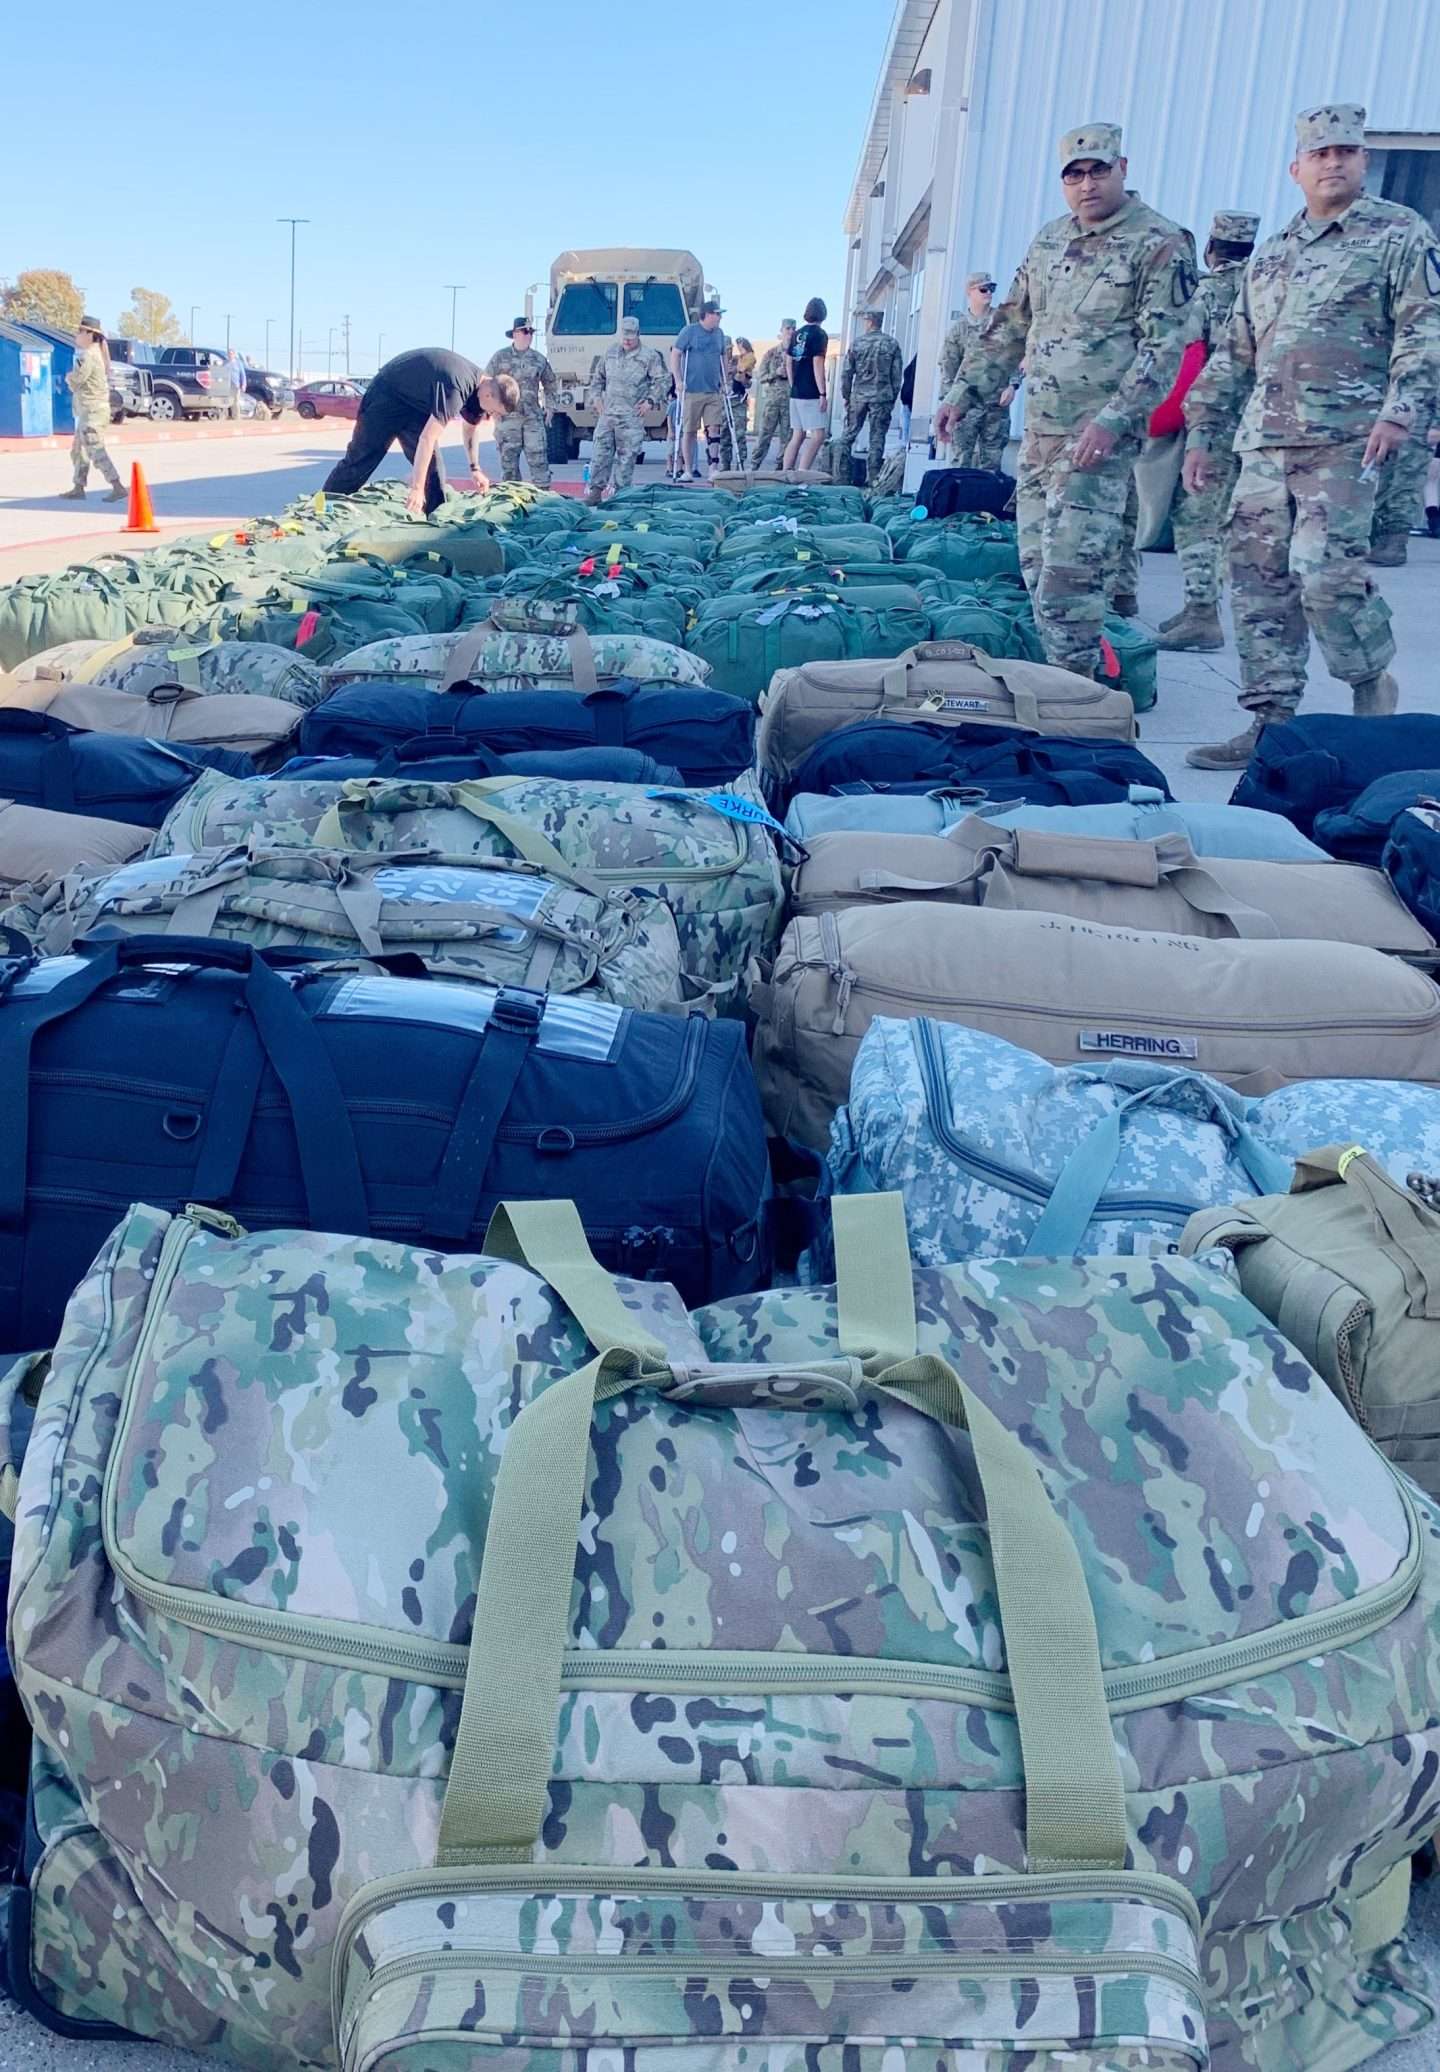 Bags laid out and ready to go before deployment.